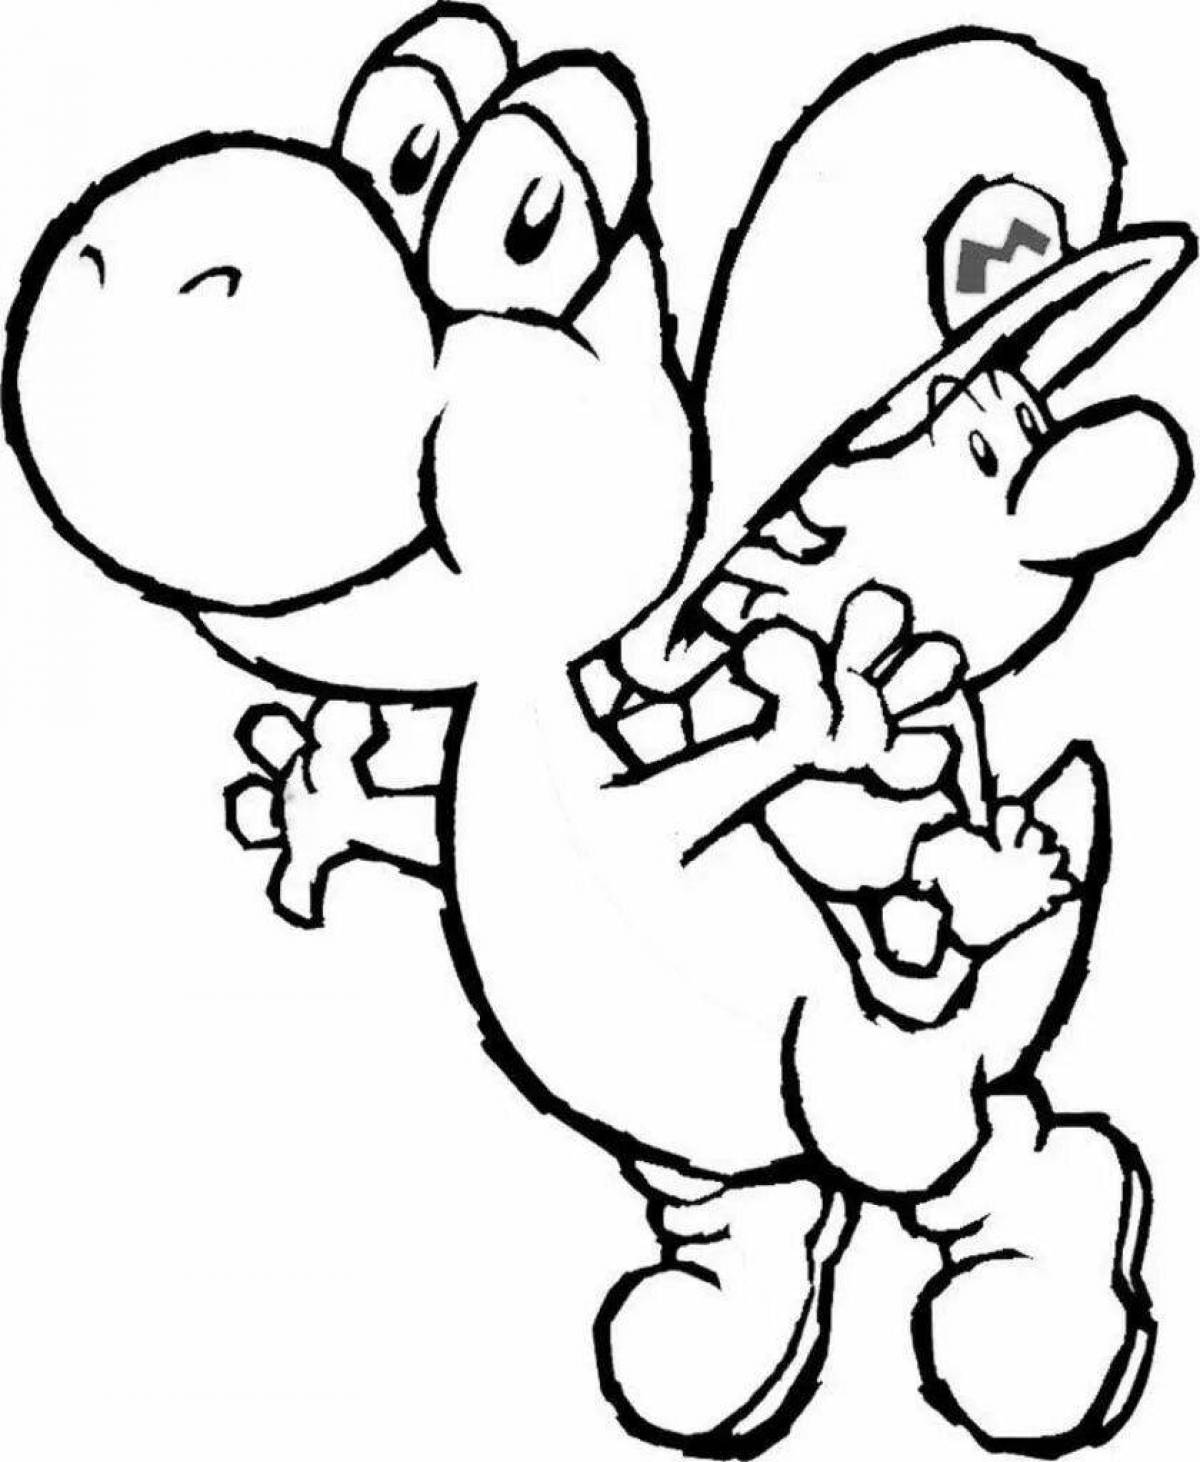 Yoshi and lana's colorful coloring page